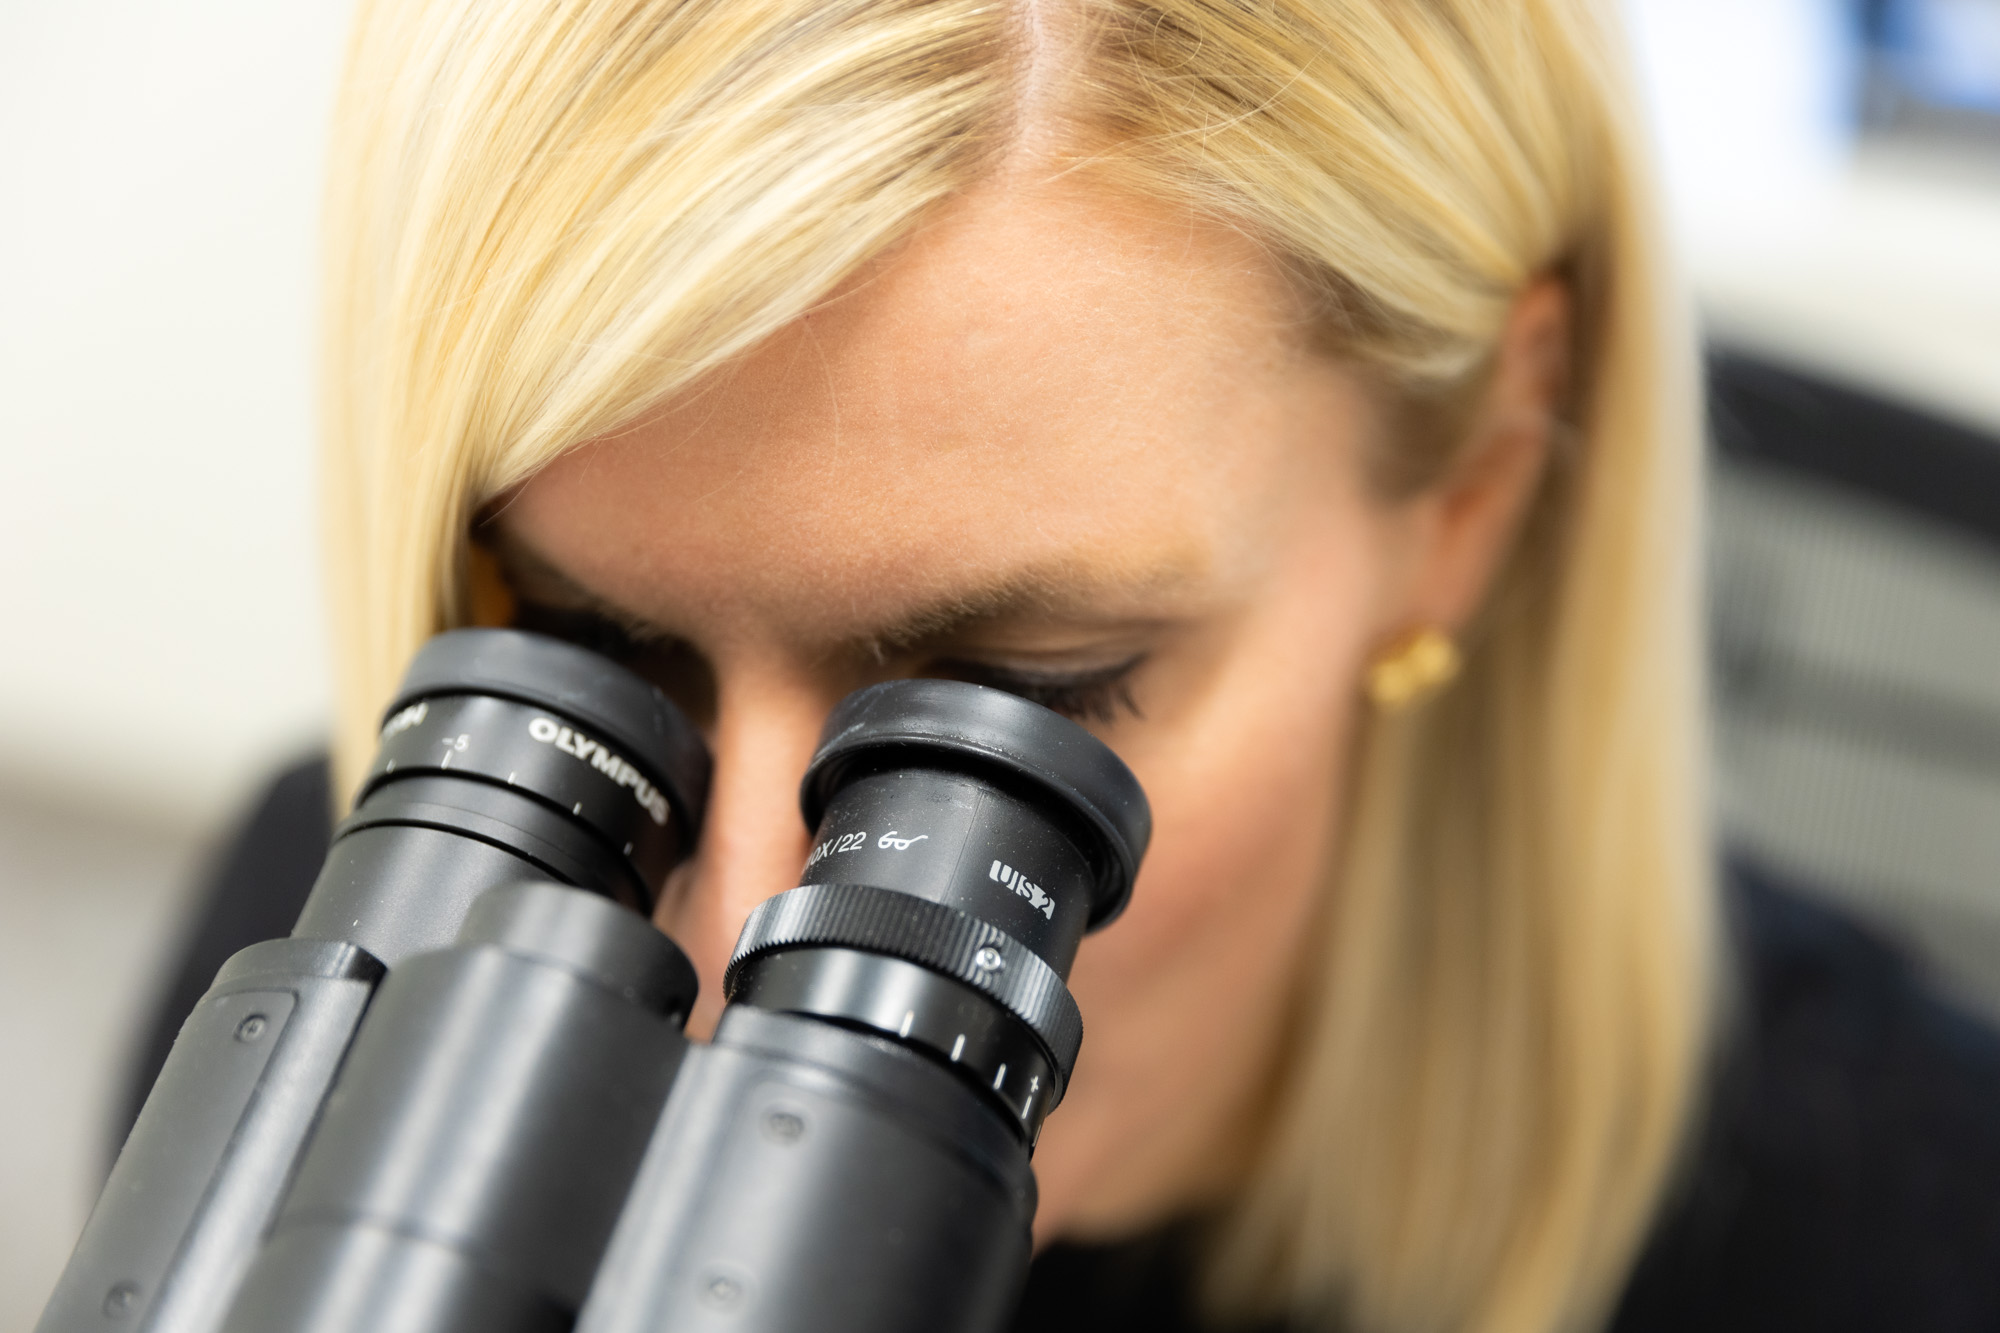 A female Kansas City Skin and Cancer Center provider looks into a microscope. Only her face and the top of the microscope is visible.